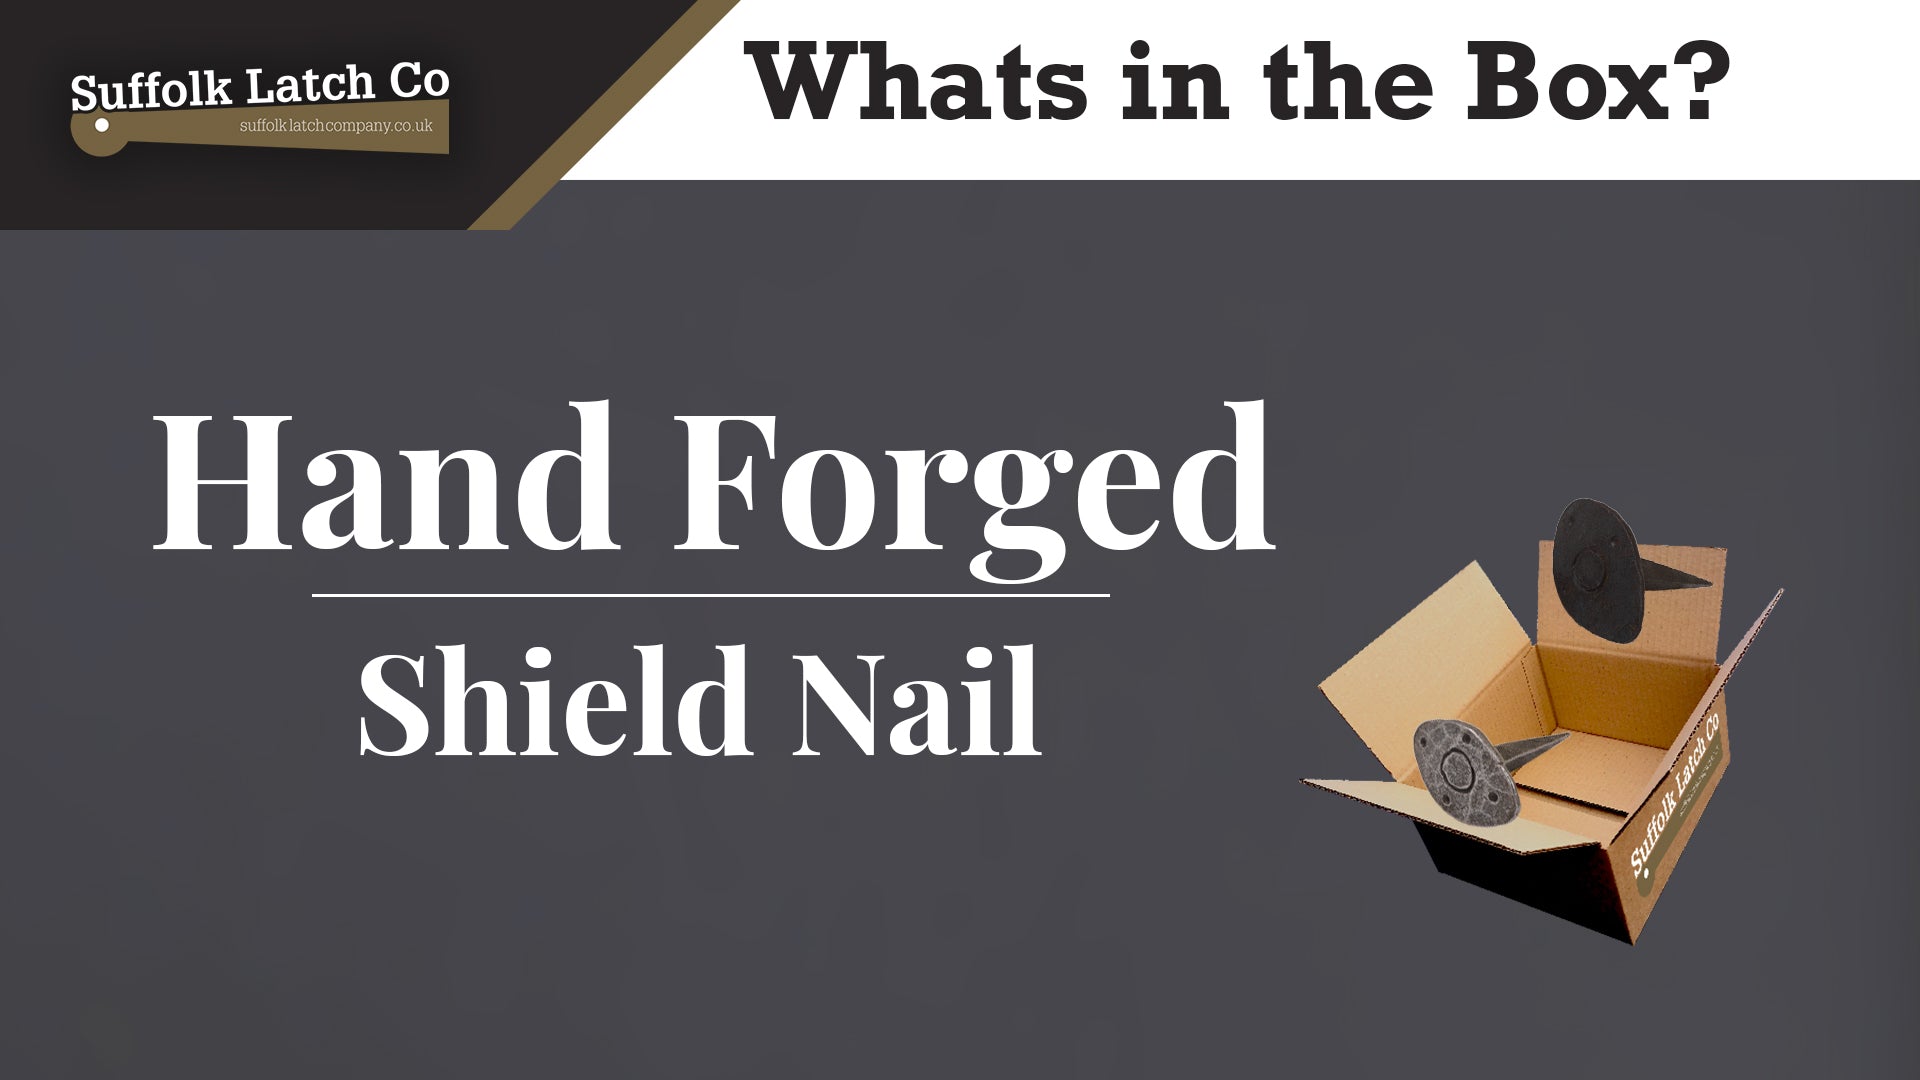 What's in the Box: Hand Forged Nail Shield